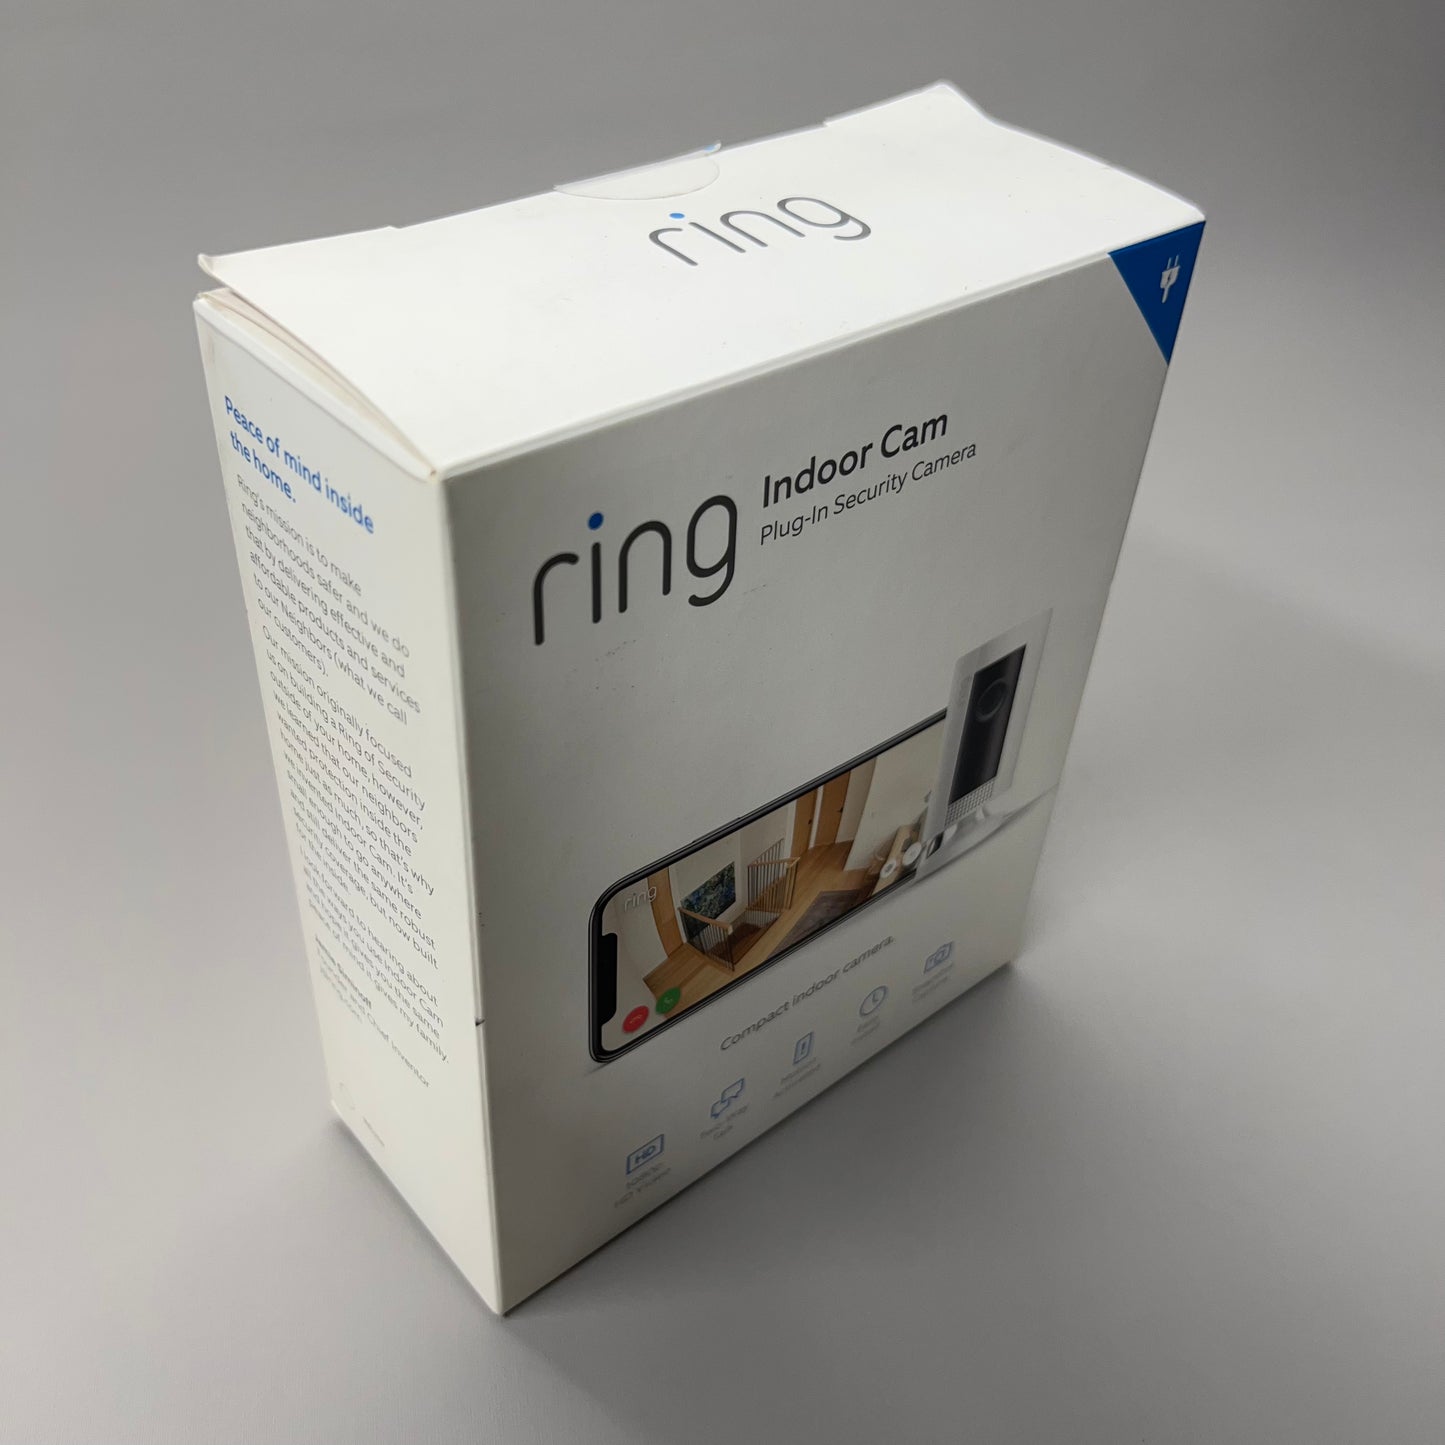 RING Indoor Cam 1080P WiFi Plug-In Security Camera 8SN1S9-WEN0 (Pre-Owned)